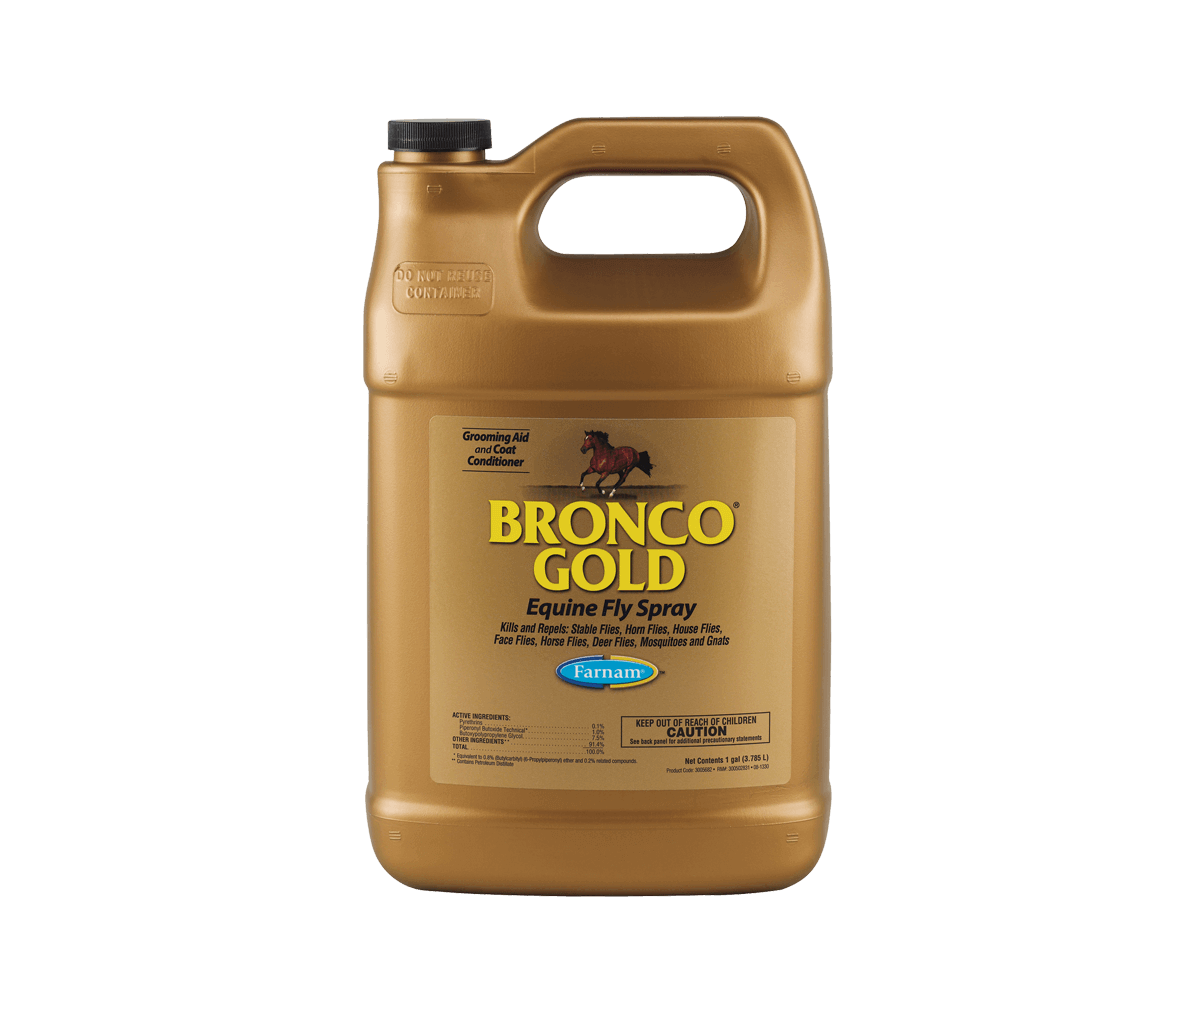 Bronco Gold Horse Fly Spray & Coat Conditioner, Fly Control